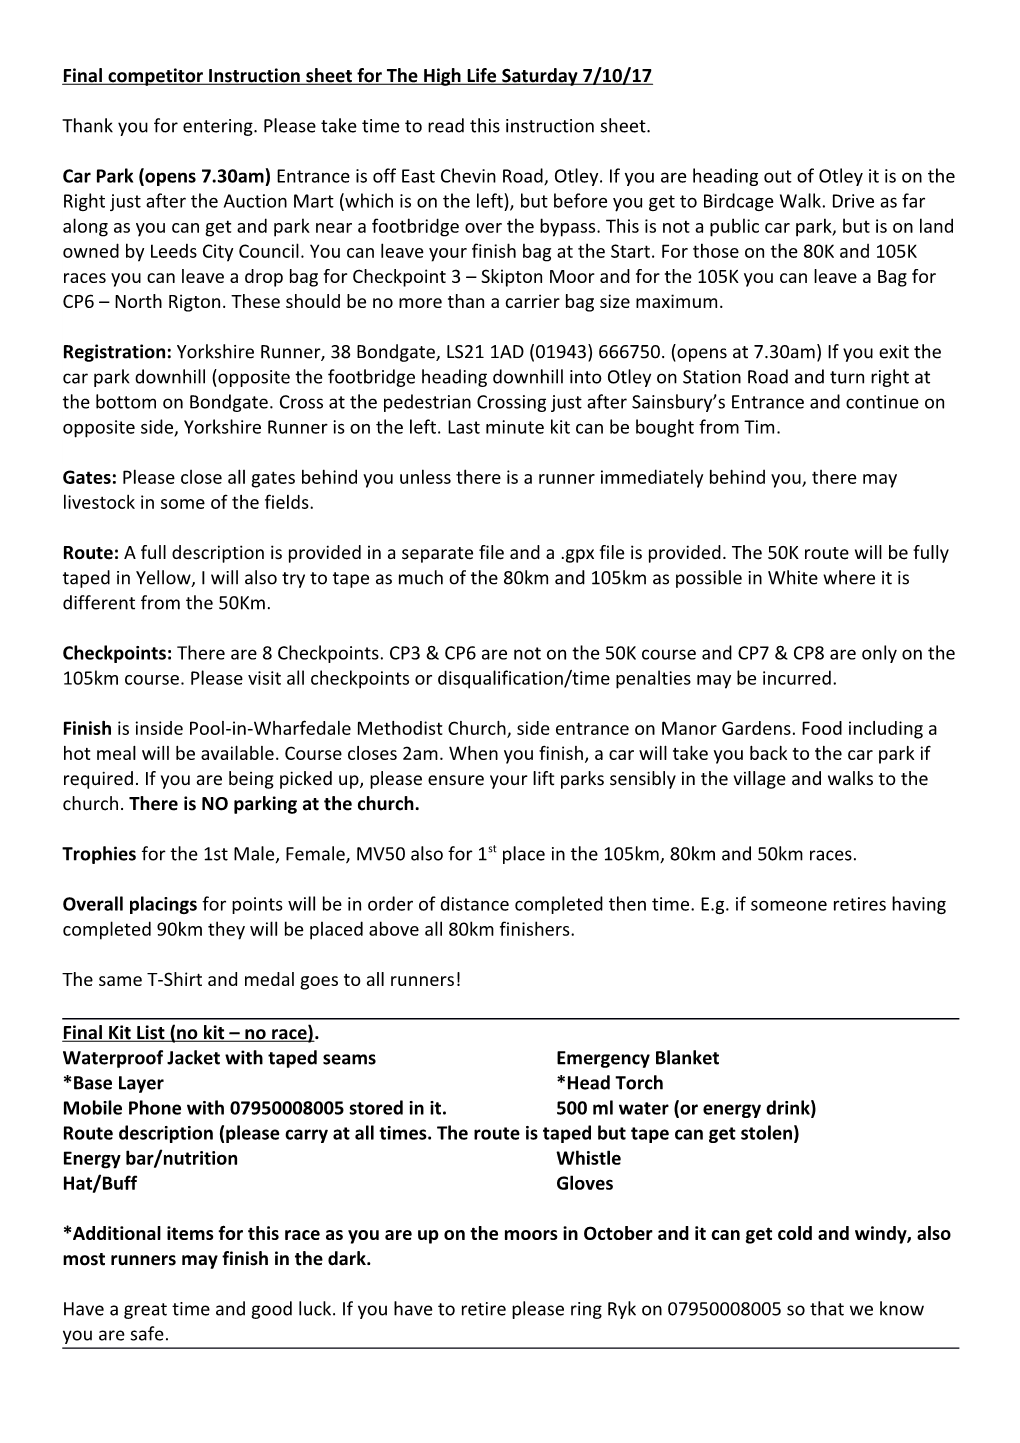 Final Competitor Instruction Sheet for the High Life Saturday 7/10/17